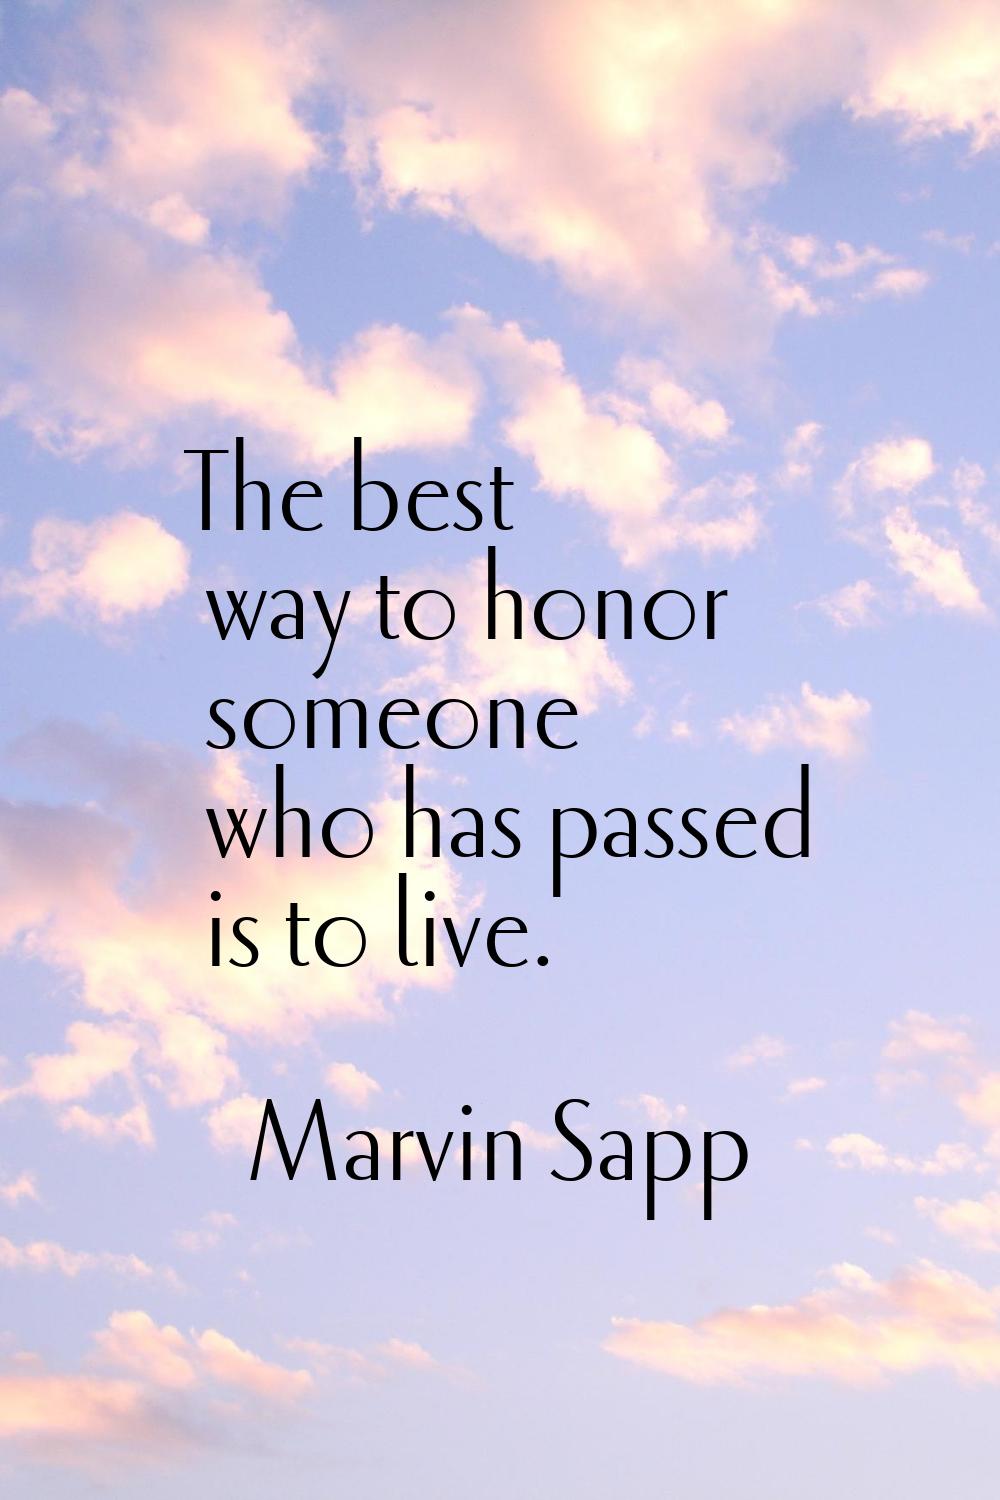 The best way to honor someone who has passed is to live.